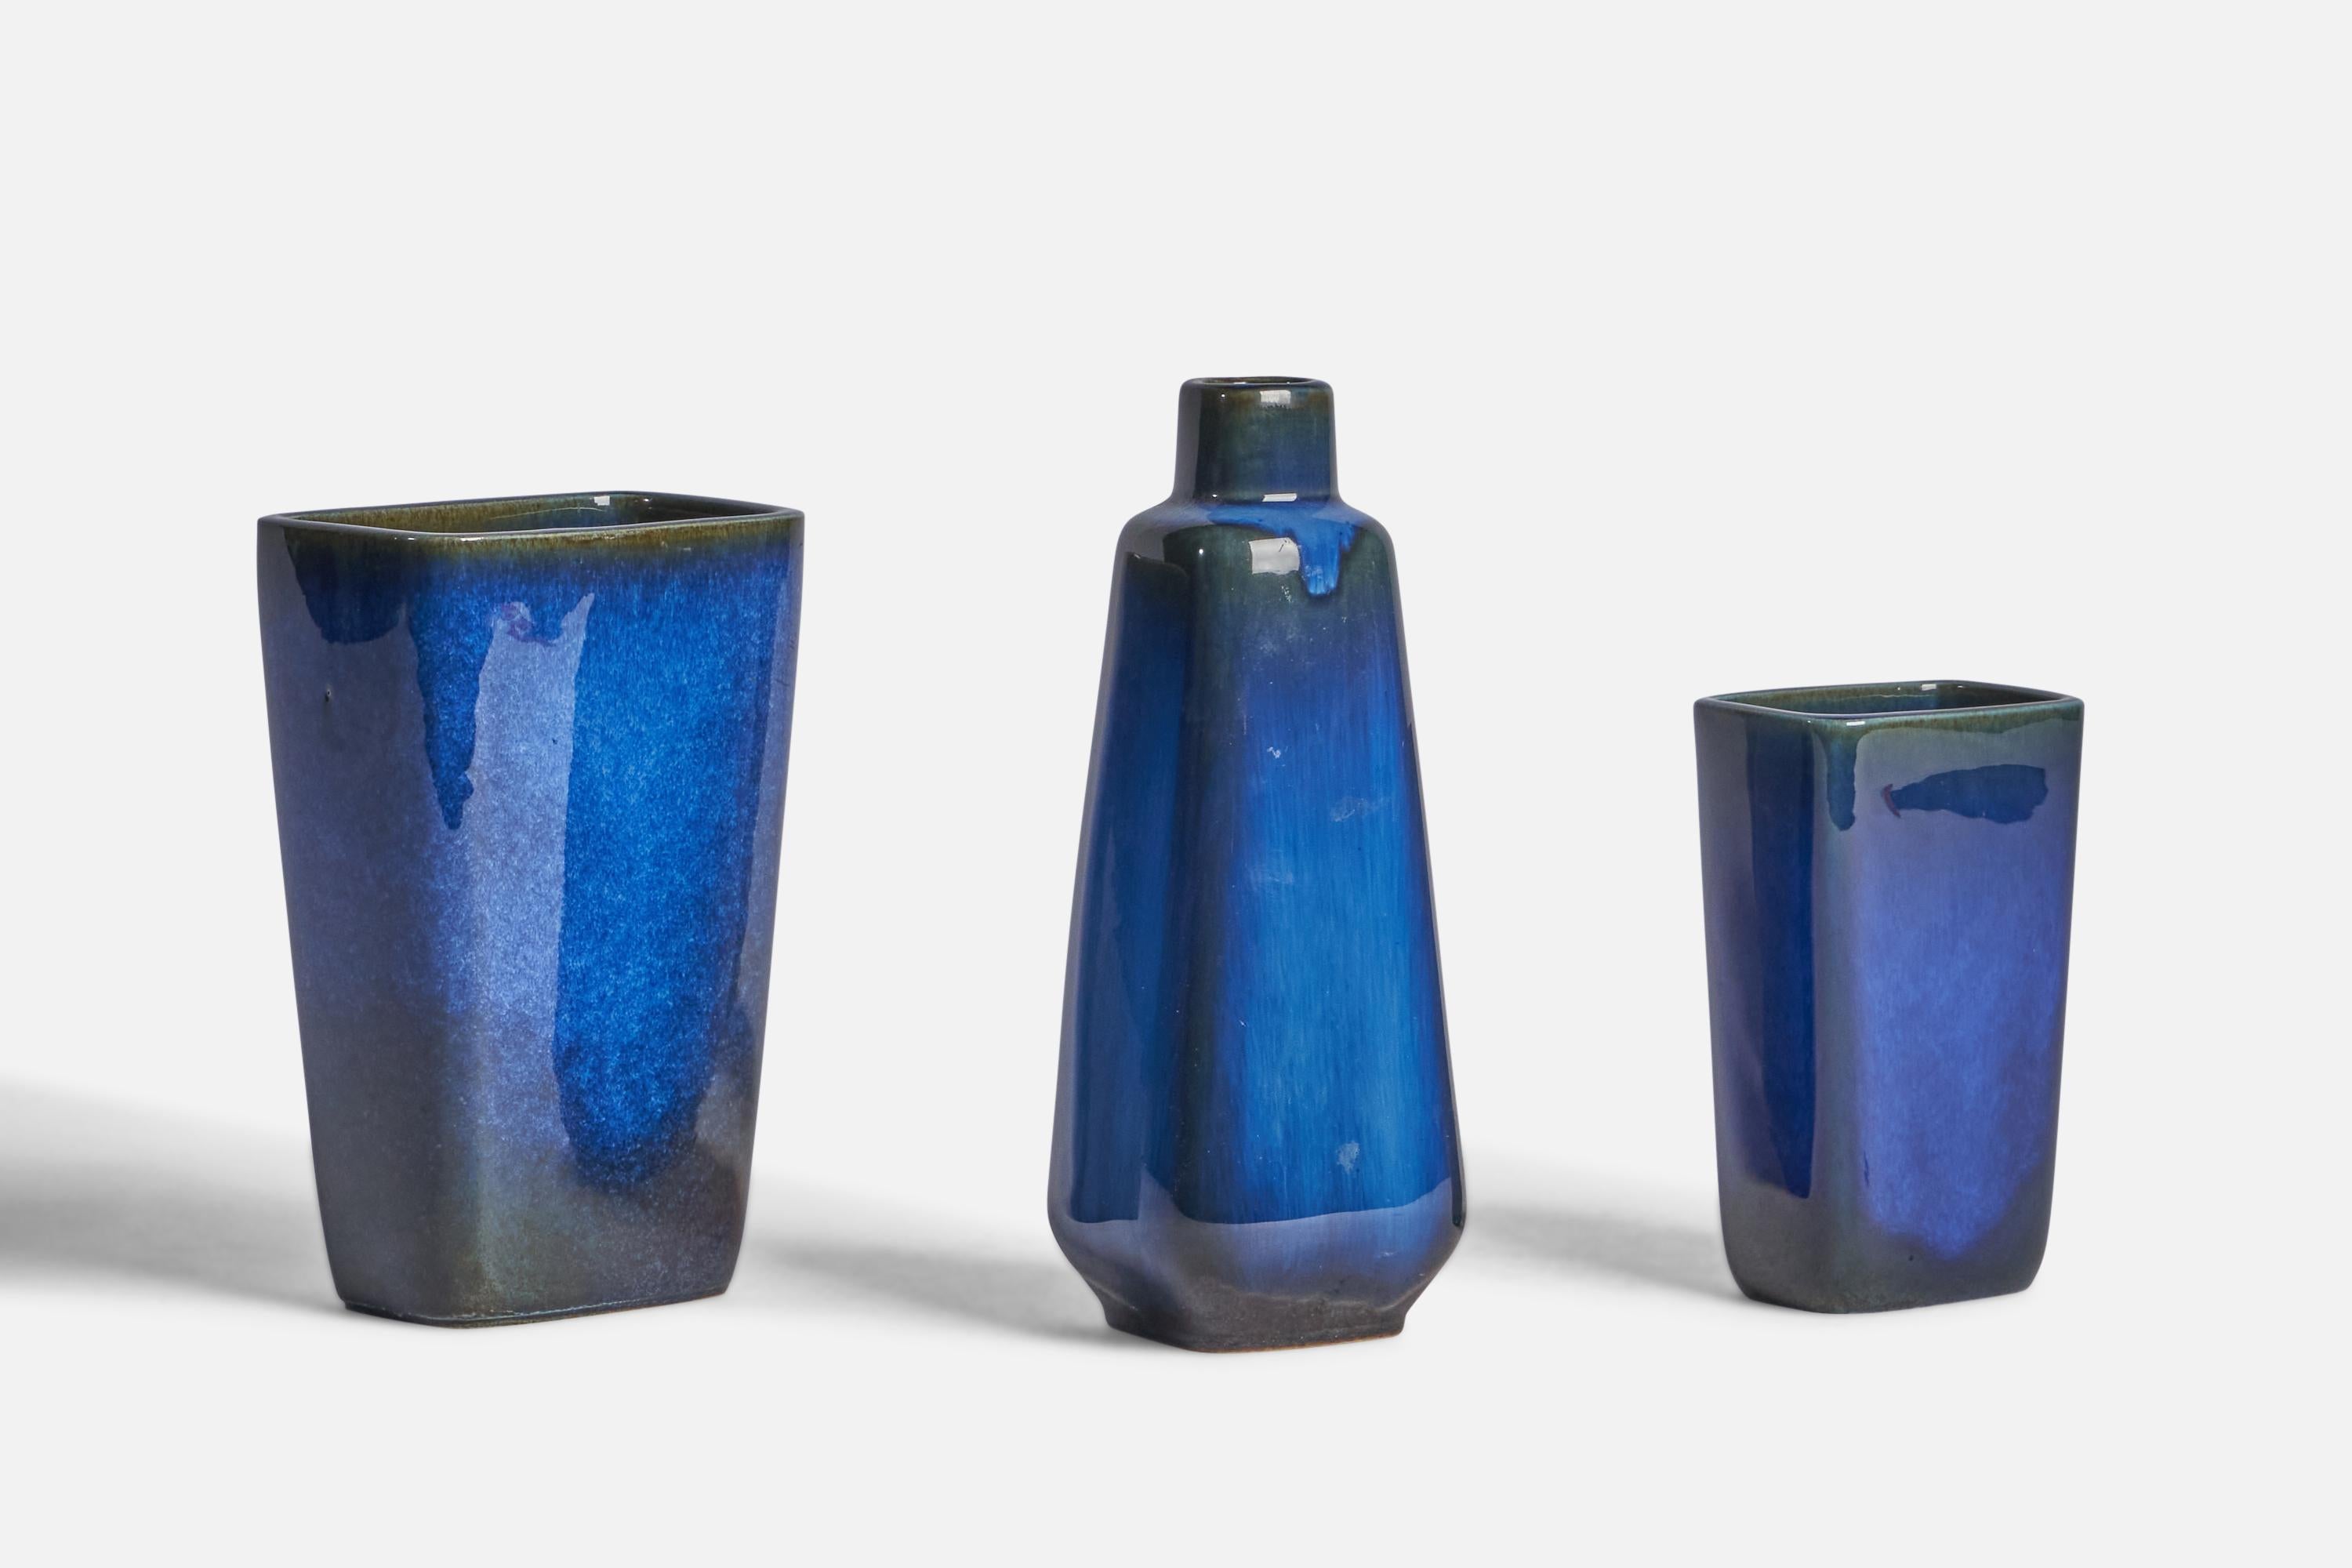 A set of 3 blue-glazed stoneware vases designed by Sven Jansson and produced by Gustavsberg, Sweden, c. 1960s.

Overall Dimensions (inches): 8.25” H x 3” W x 3” D
Overall Dimensions (inches): 6.75” H x 4.4” W x 2.9” D 
Overall Dimensions (inches):